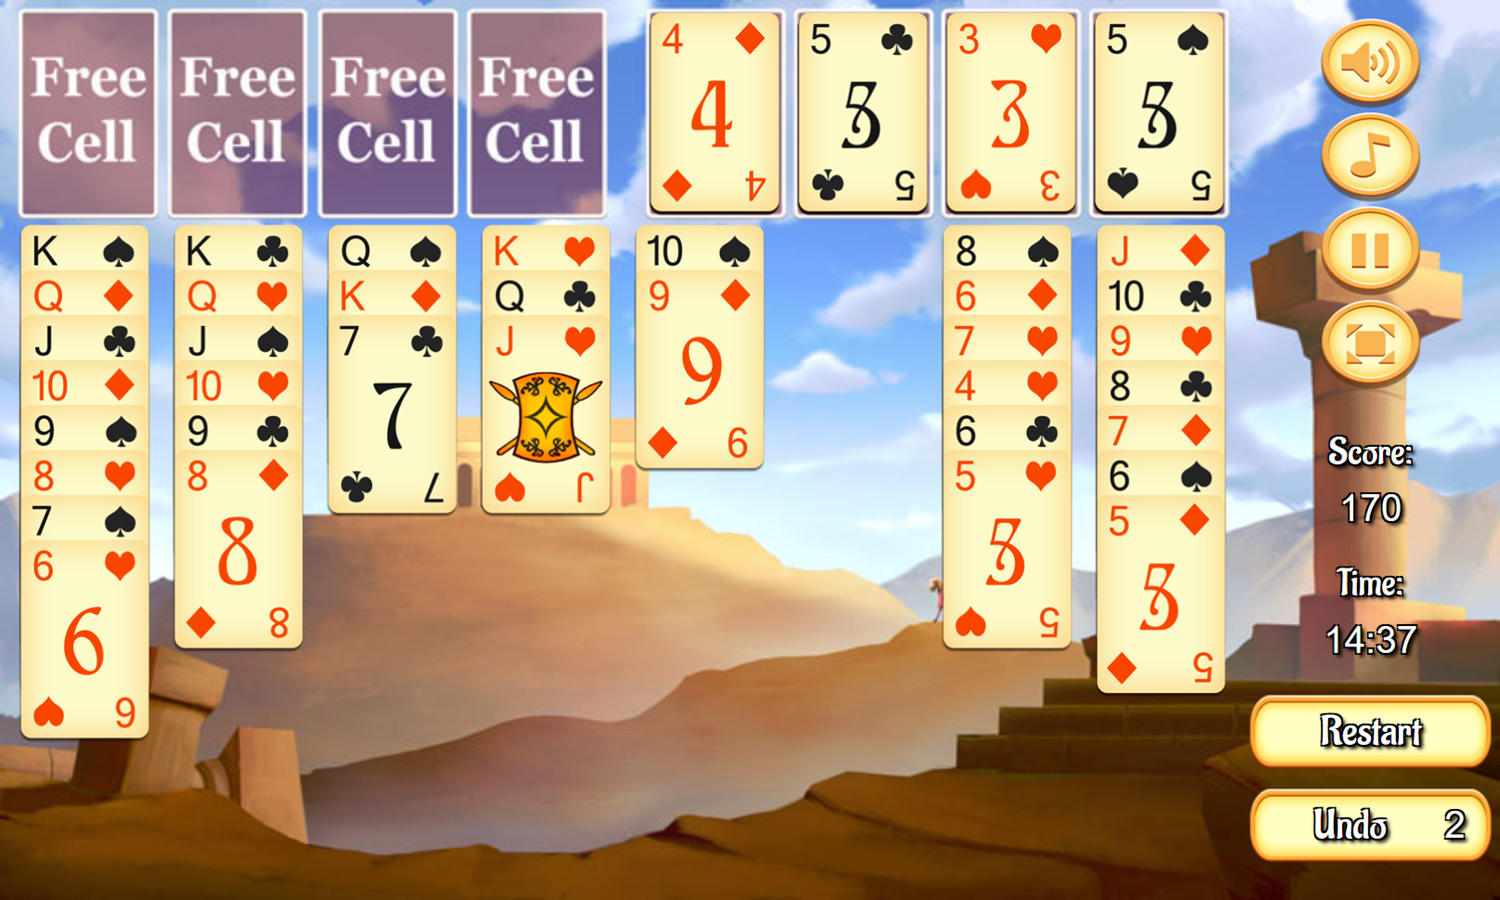 Medieval Freecell Game Play Screenshot.